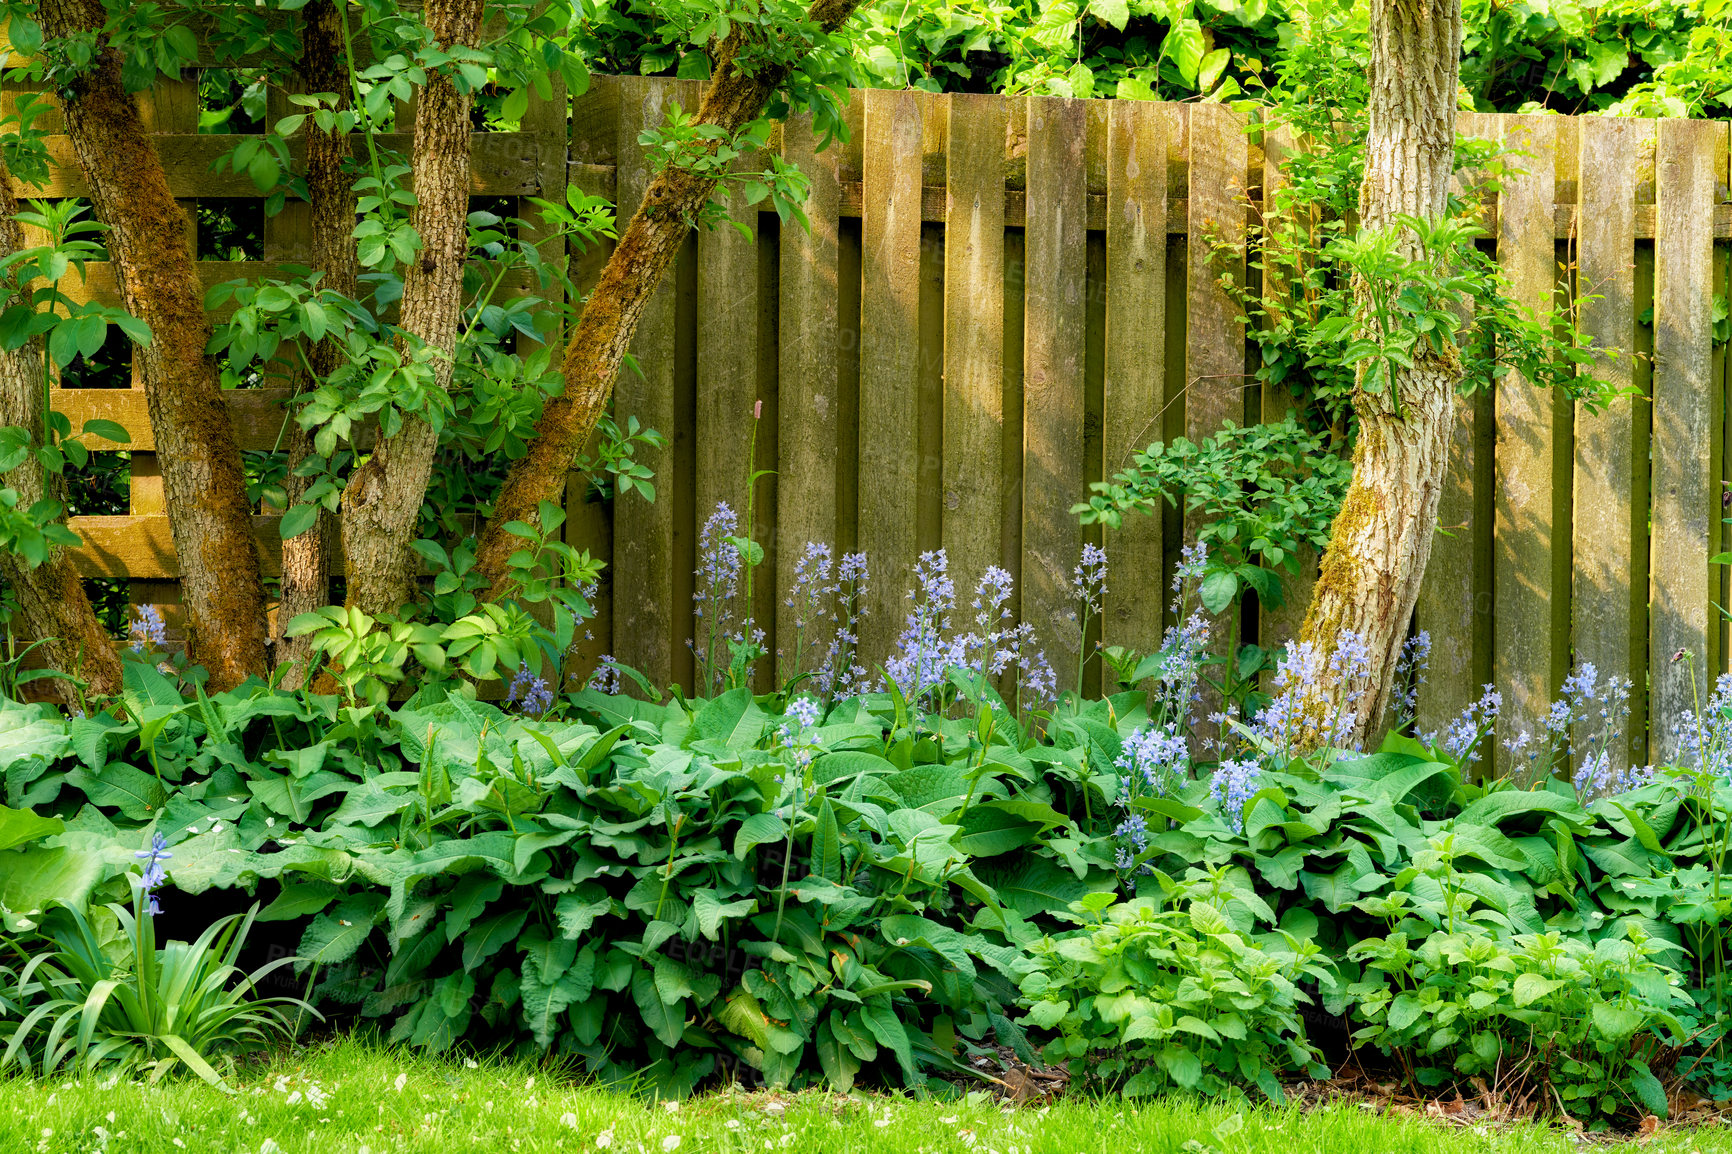 Buy stock photo Fence, grass and backyard with plants in garden with flowers in nature with tree in summer. Trees, garden and fences with bush or plant in the outdoor with sun or creative growth in the environment.